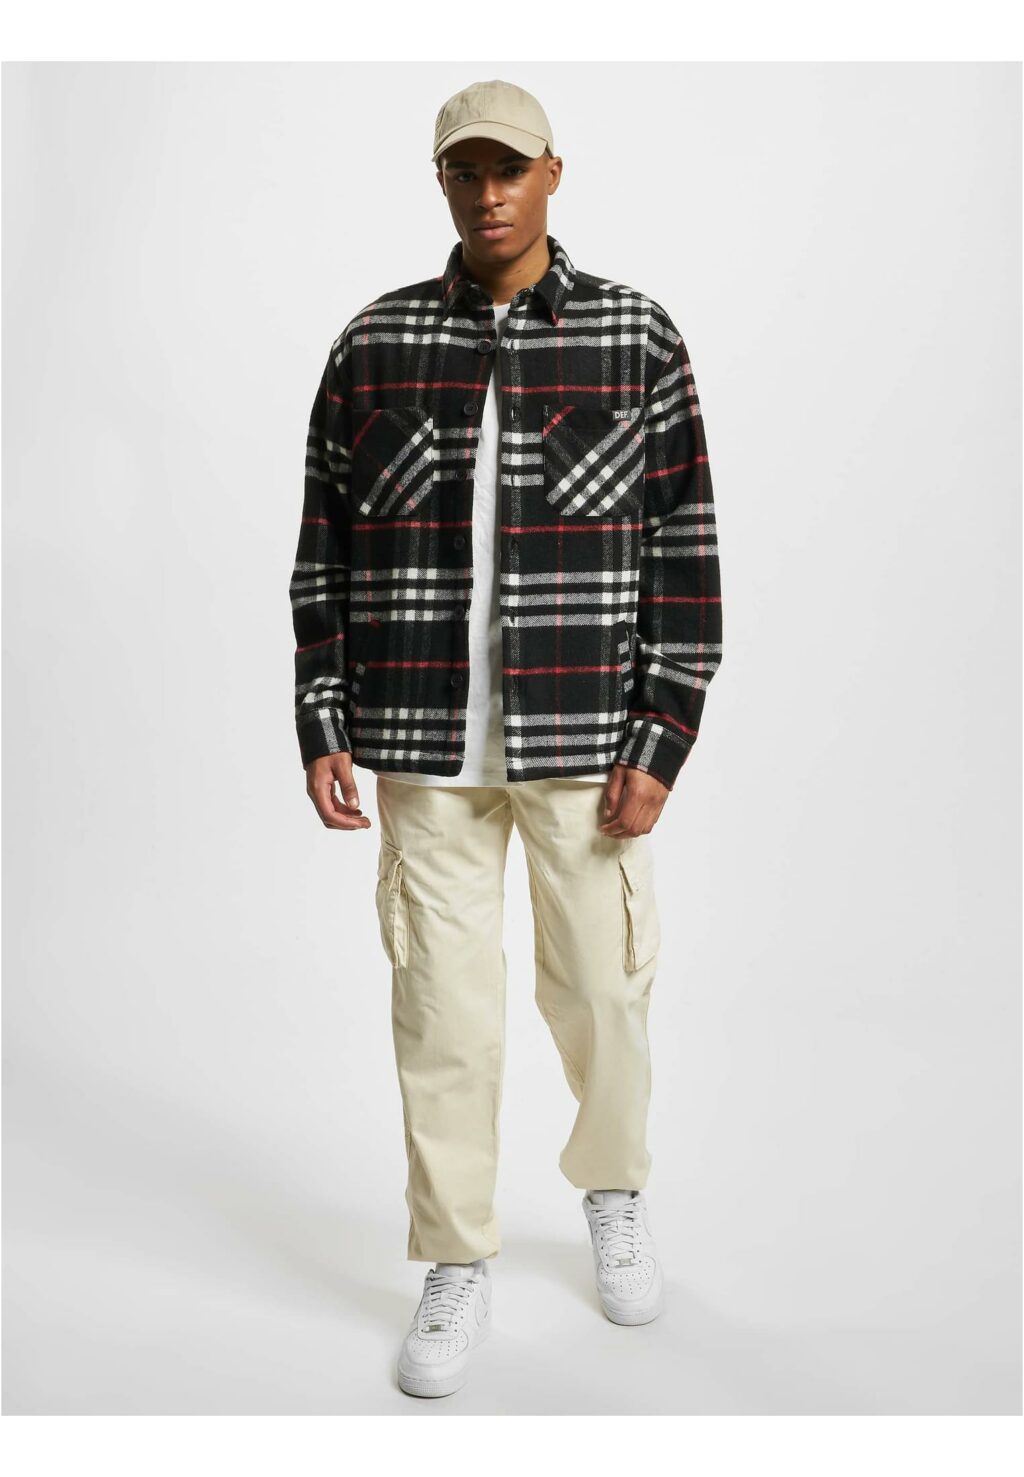 DEF Woven Shaket black/red DFST008